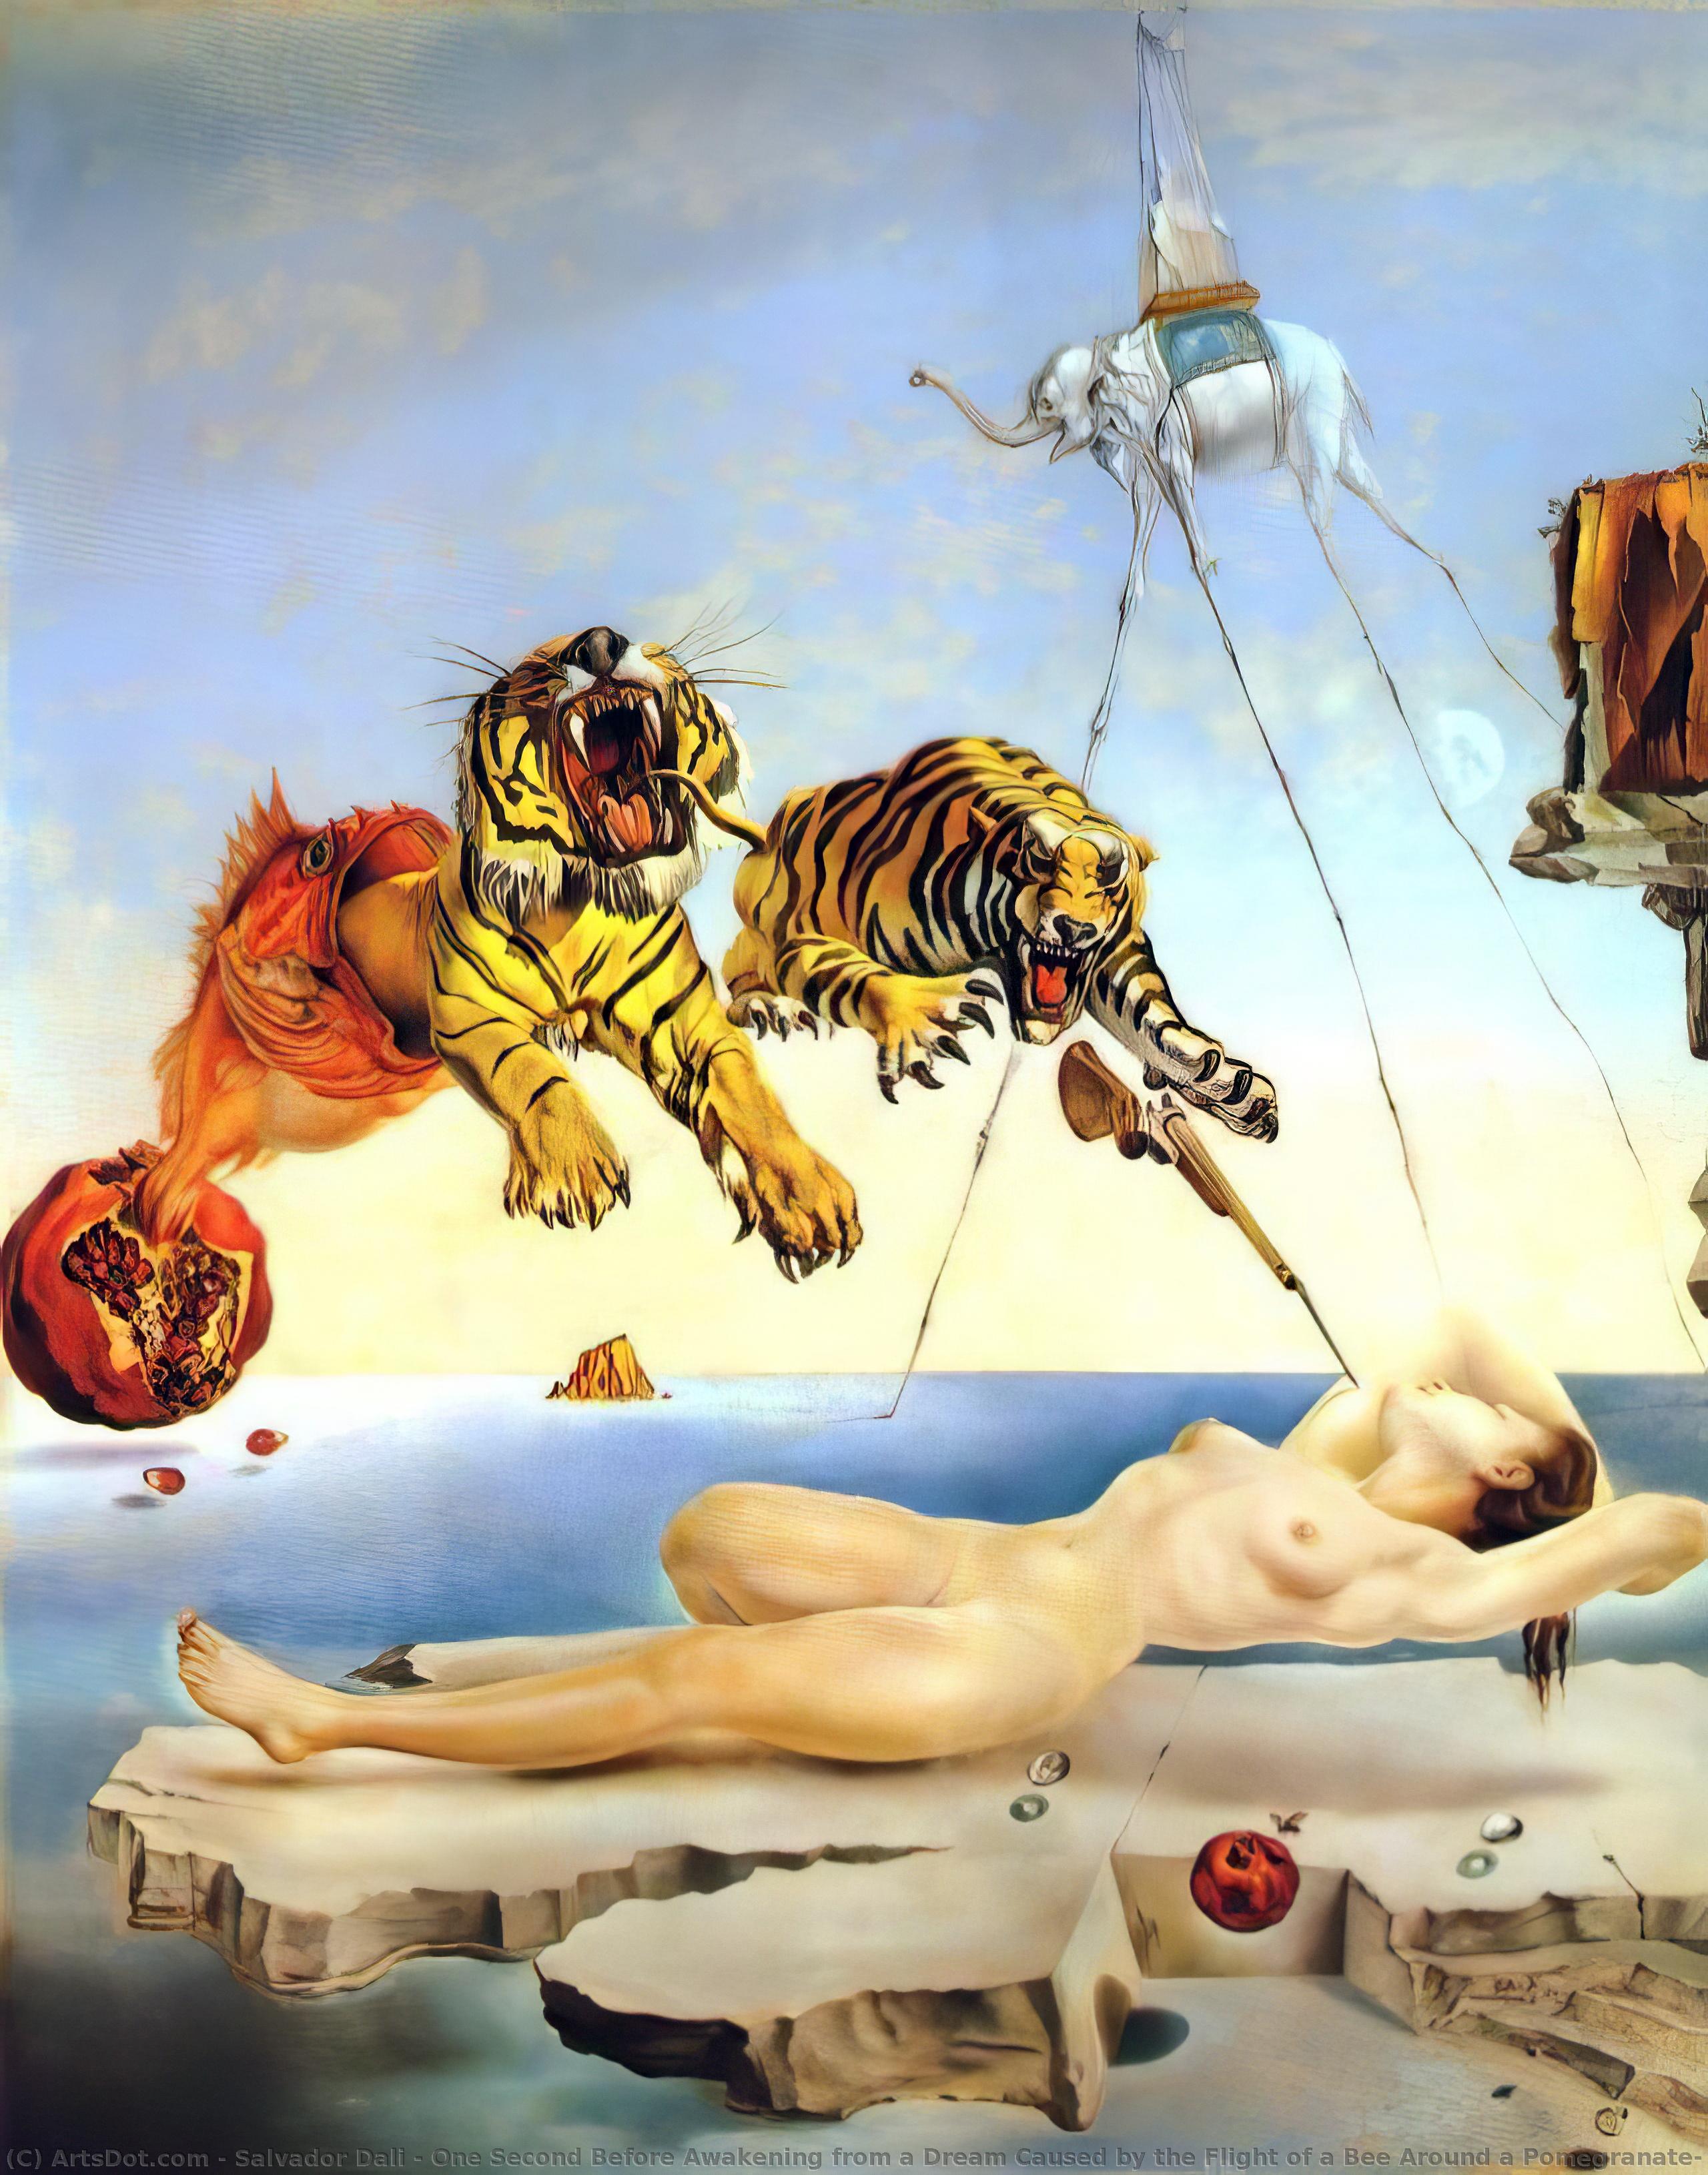 WikiOO.org - دایره المعارف هنرهای زیبا - نقاشی، آثار هنری Salvador Dali - One Second Before Awakening from a Dream Caused by the Flight of a Bee Around a Pomegranate, 1944